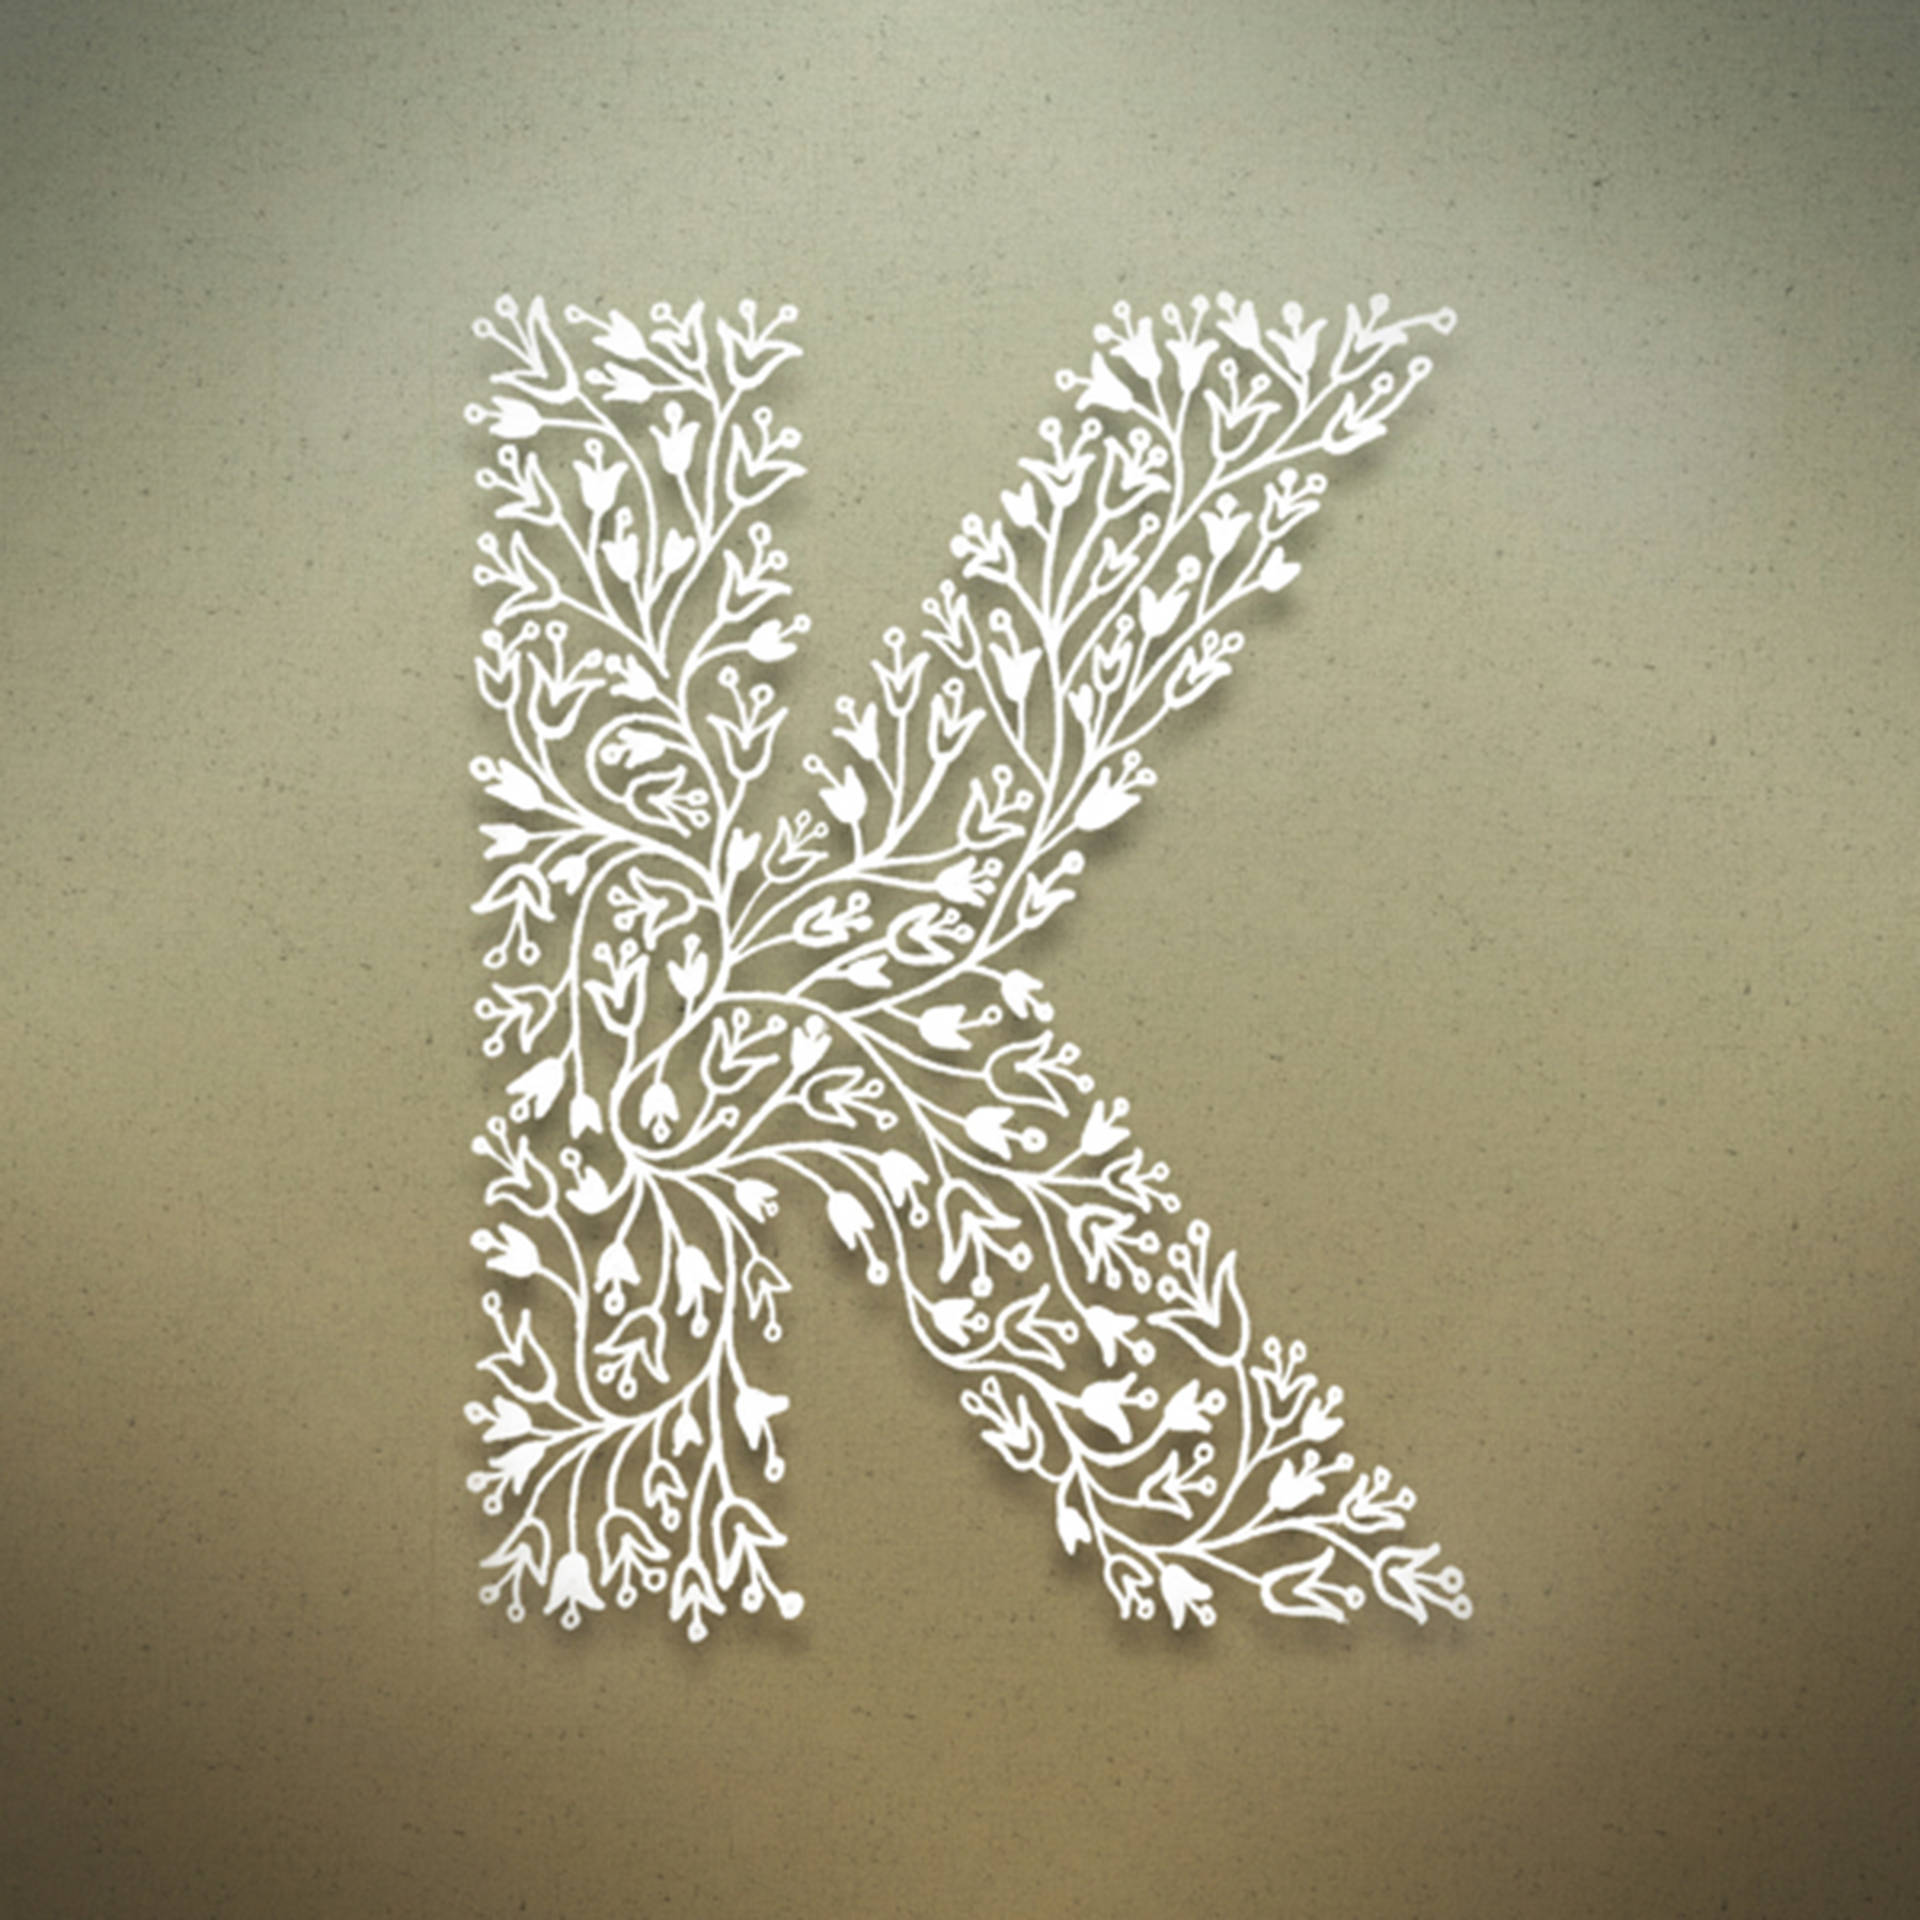 Royal Letter K In Glitter And Gold